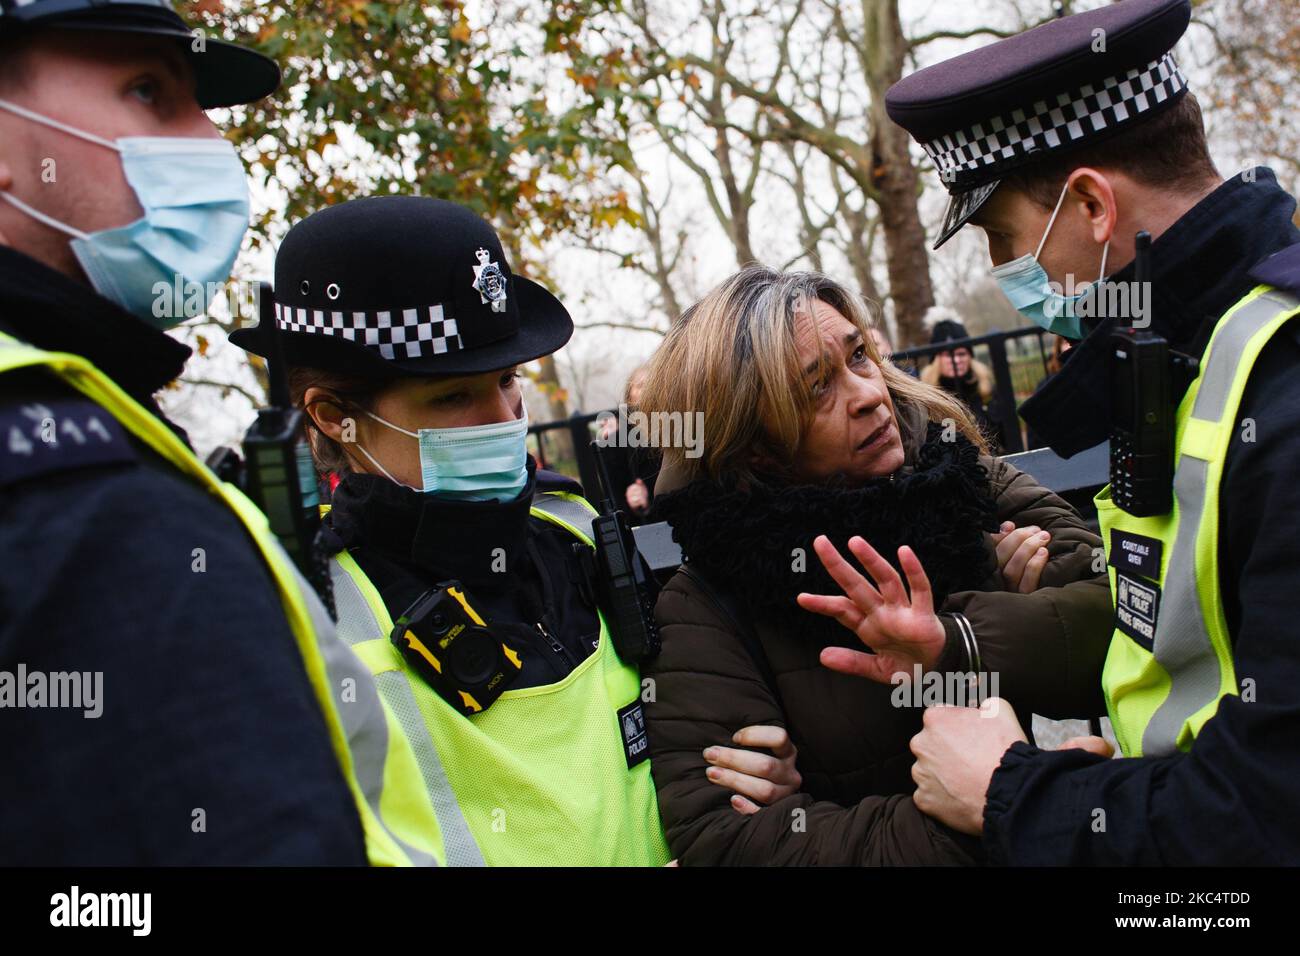 An anti-lockdown activist is arrested at Marble Arch during a demonstration in London, England, on November 28, 2020. In an evening update the Metropolitan Police announced it had made 155 arrests over the course of the day's demonstrations, for offences including breaches of coronavirus regulations, assault on police and possession of drugs. London is to return to 'Tier 2' or 'high alert' covid-19 restrictions once the current England-wide coronavirus lockdown ends next Wednesday. All three of the tiers, assigned to local authorities across England, have been strengthened since the lockdown b Stock Photo